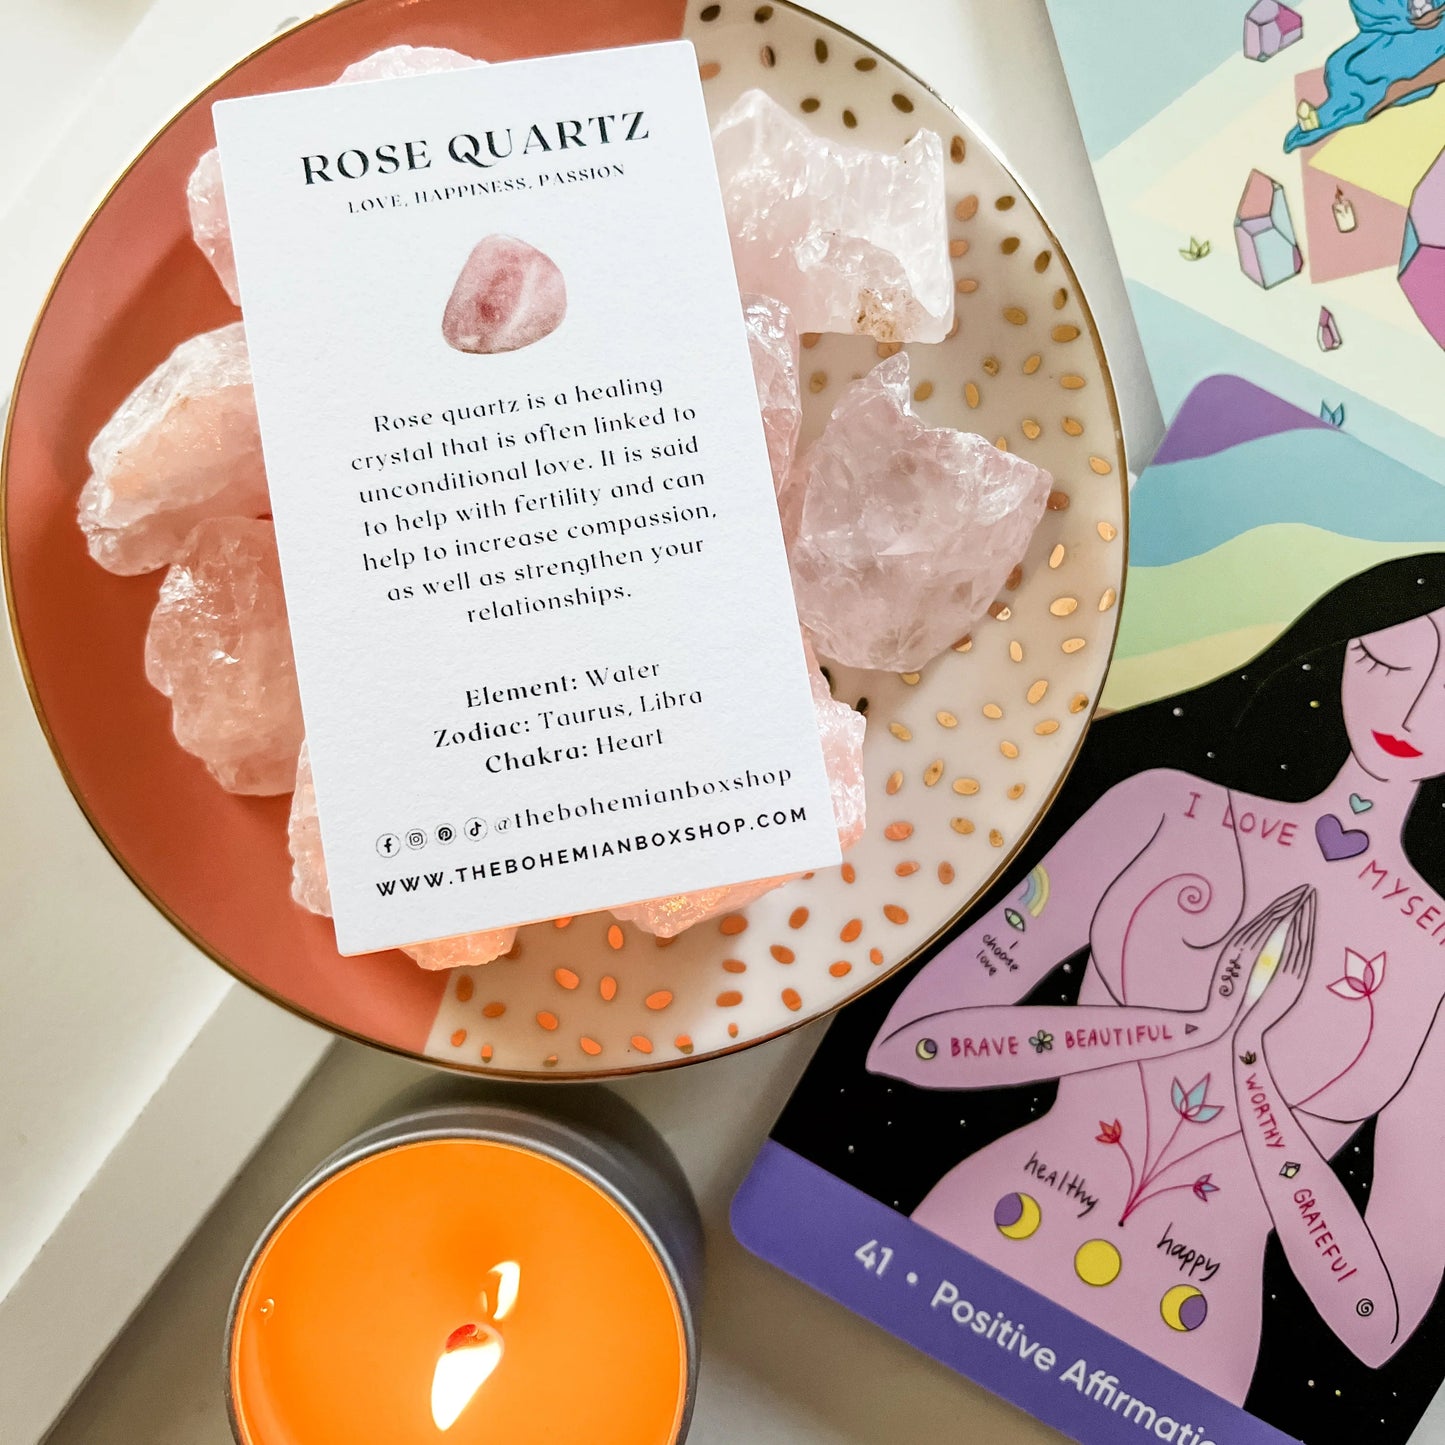 Rose Quartz Tumbled Stone with complementary keepsake information card